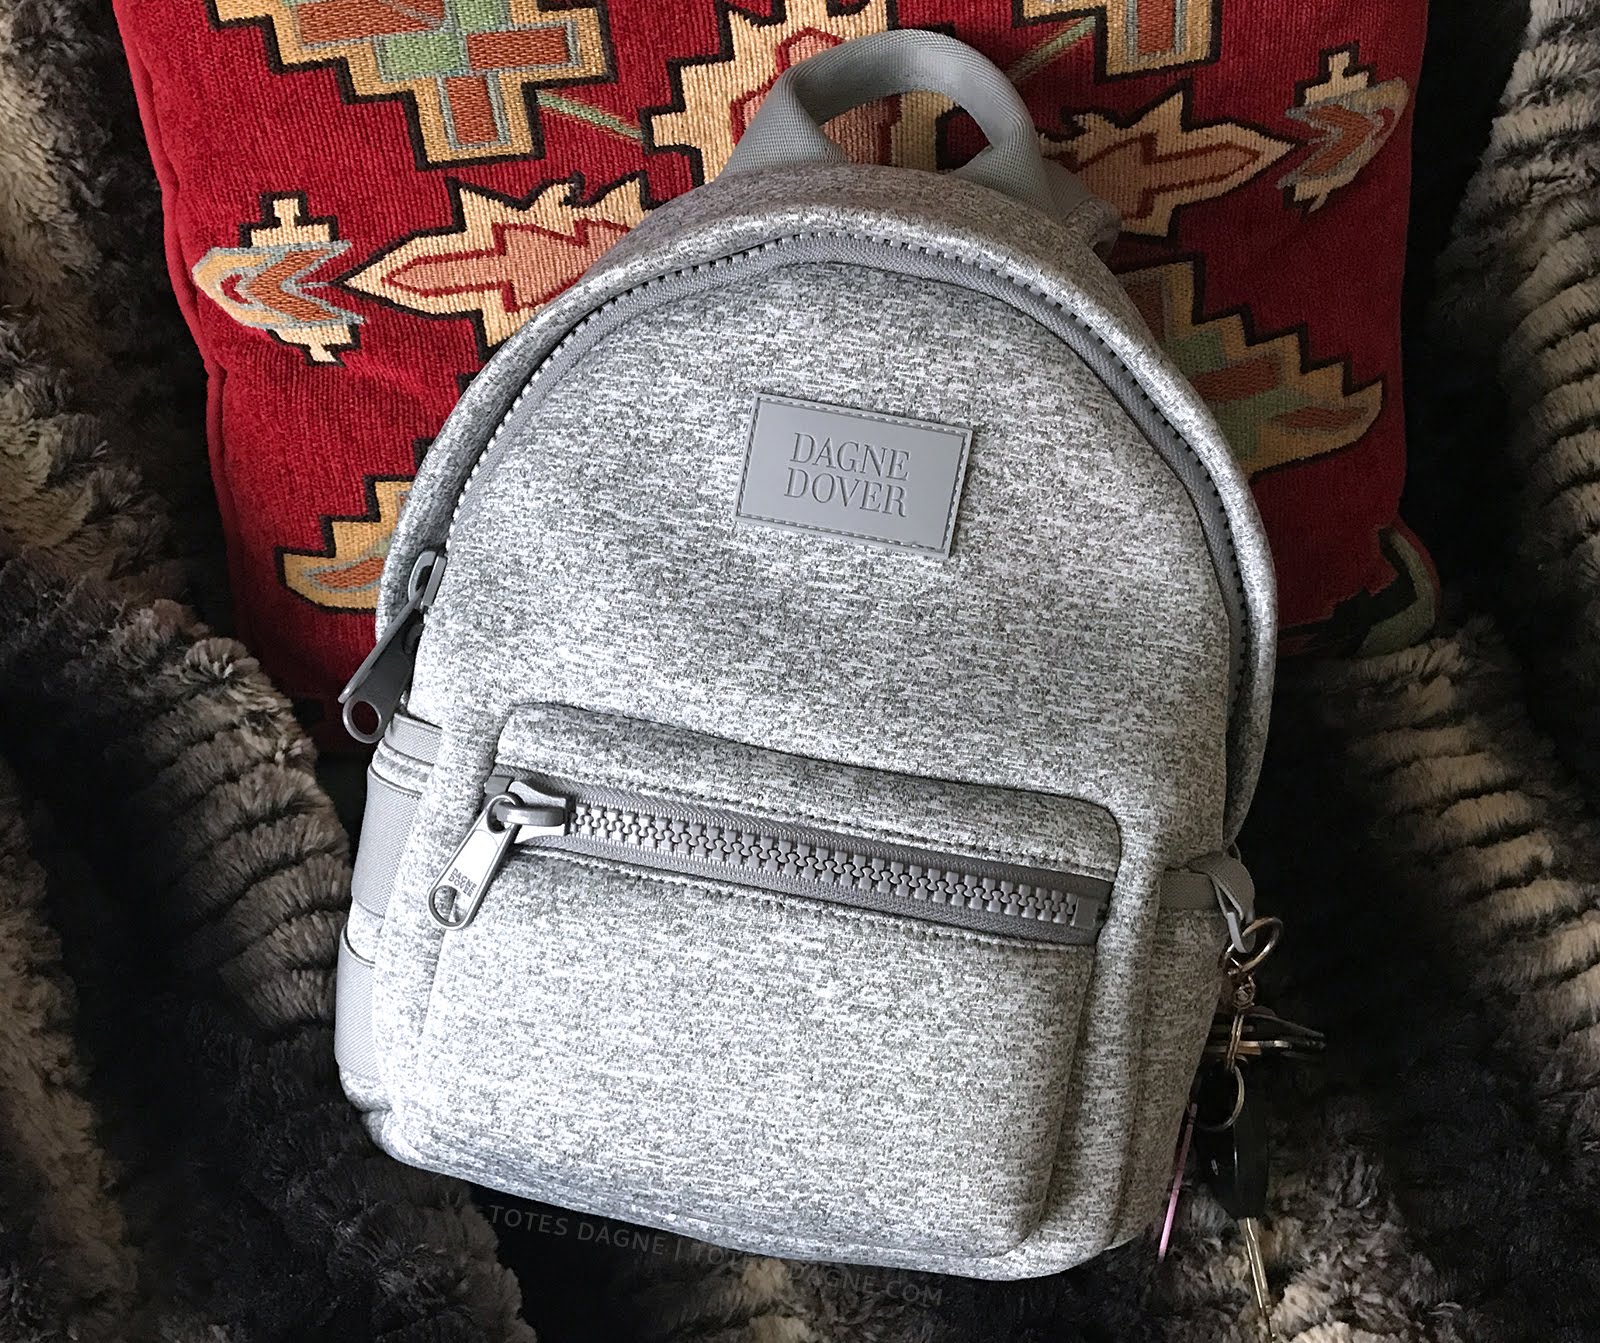 I Tried The Dagne Dover Dakota Backpack - Here's What I Thought